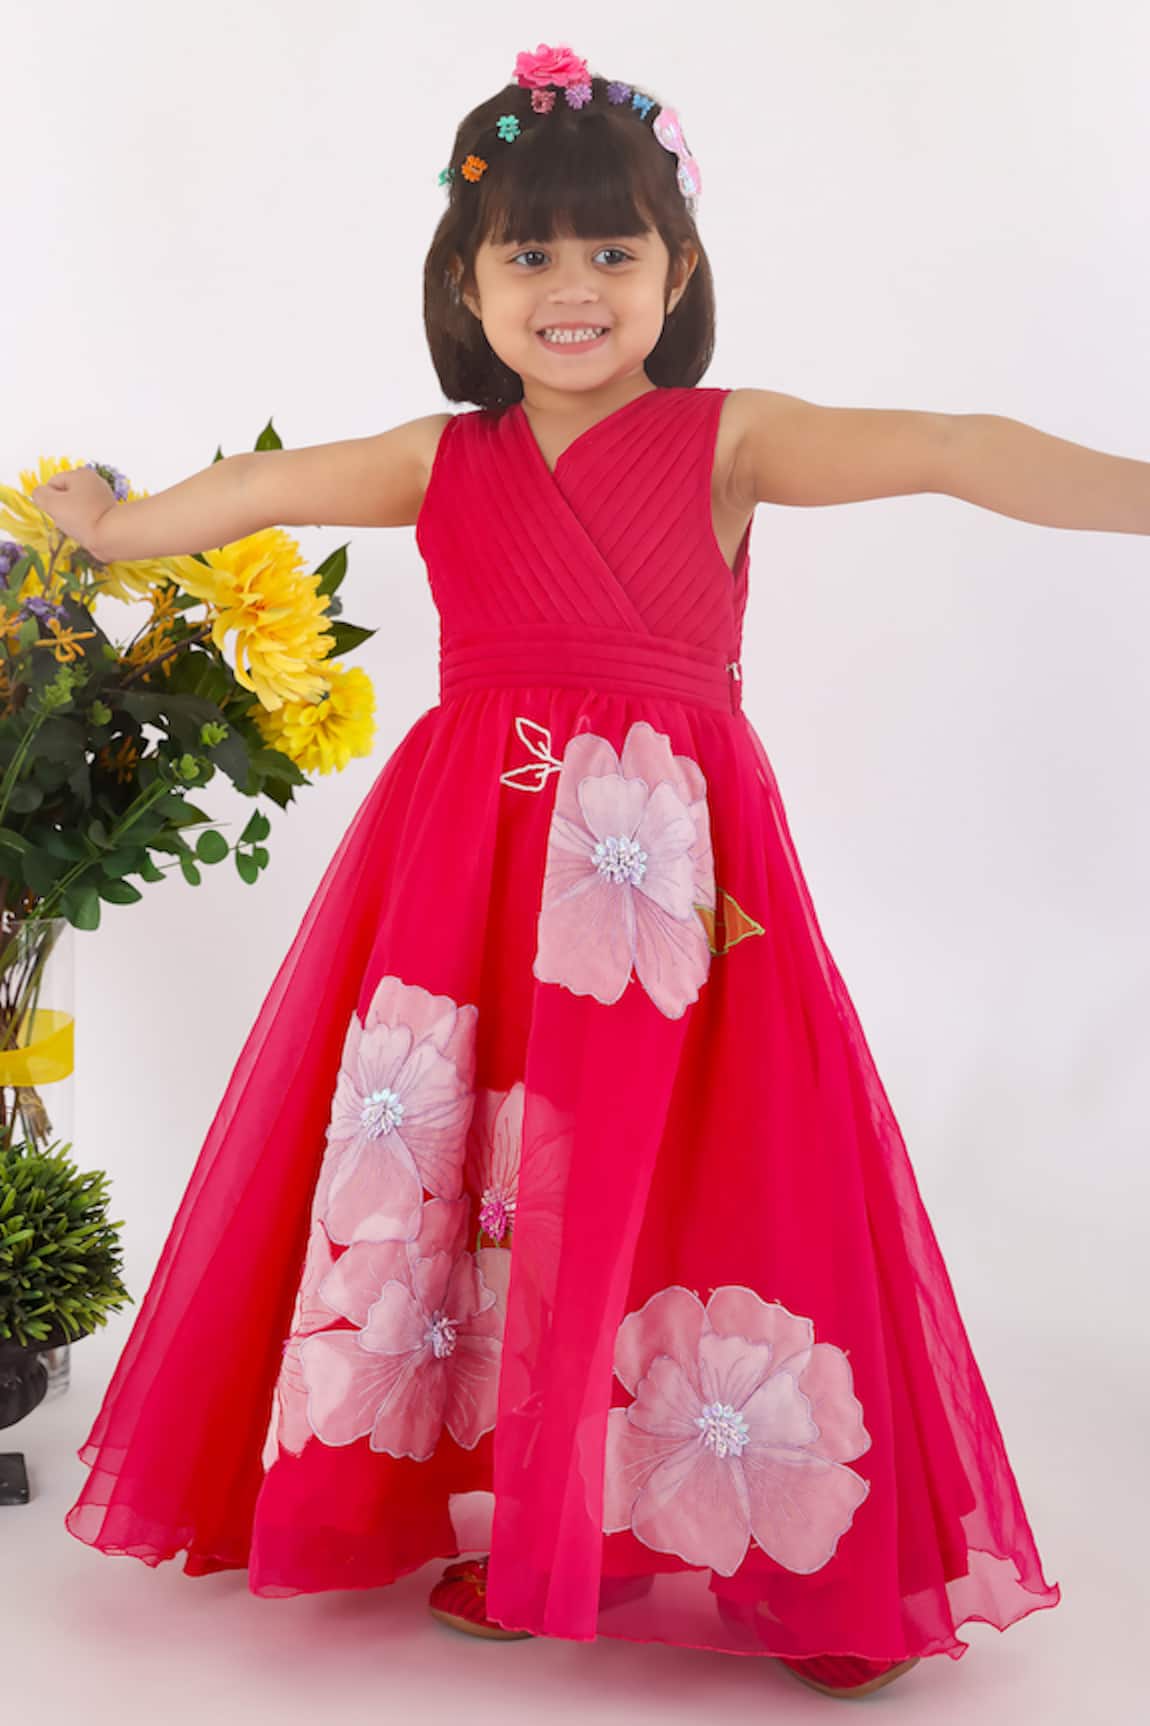 Buy the Best Pink Frock for Baby Girl Dress Online in India